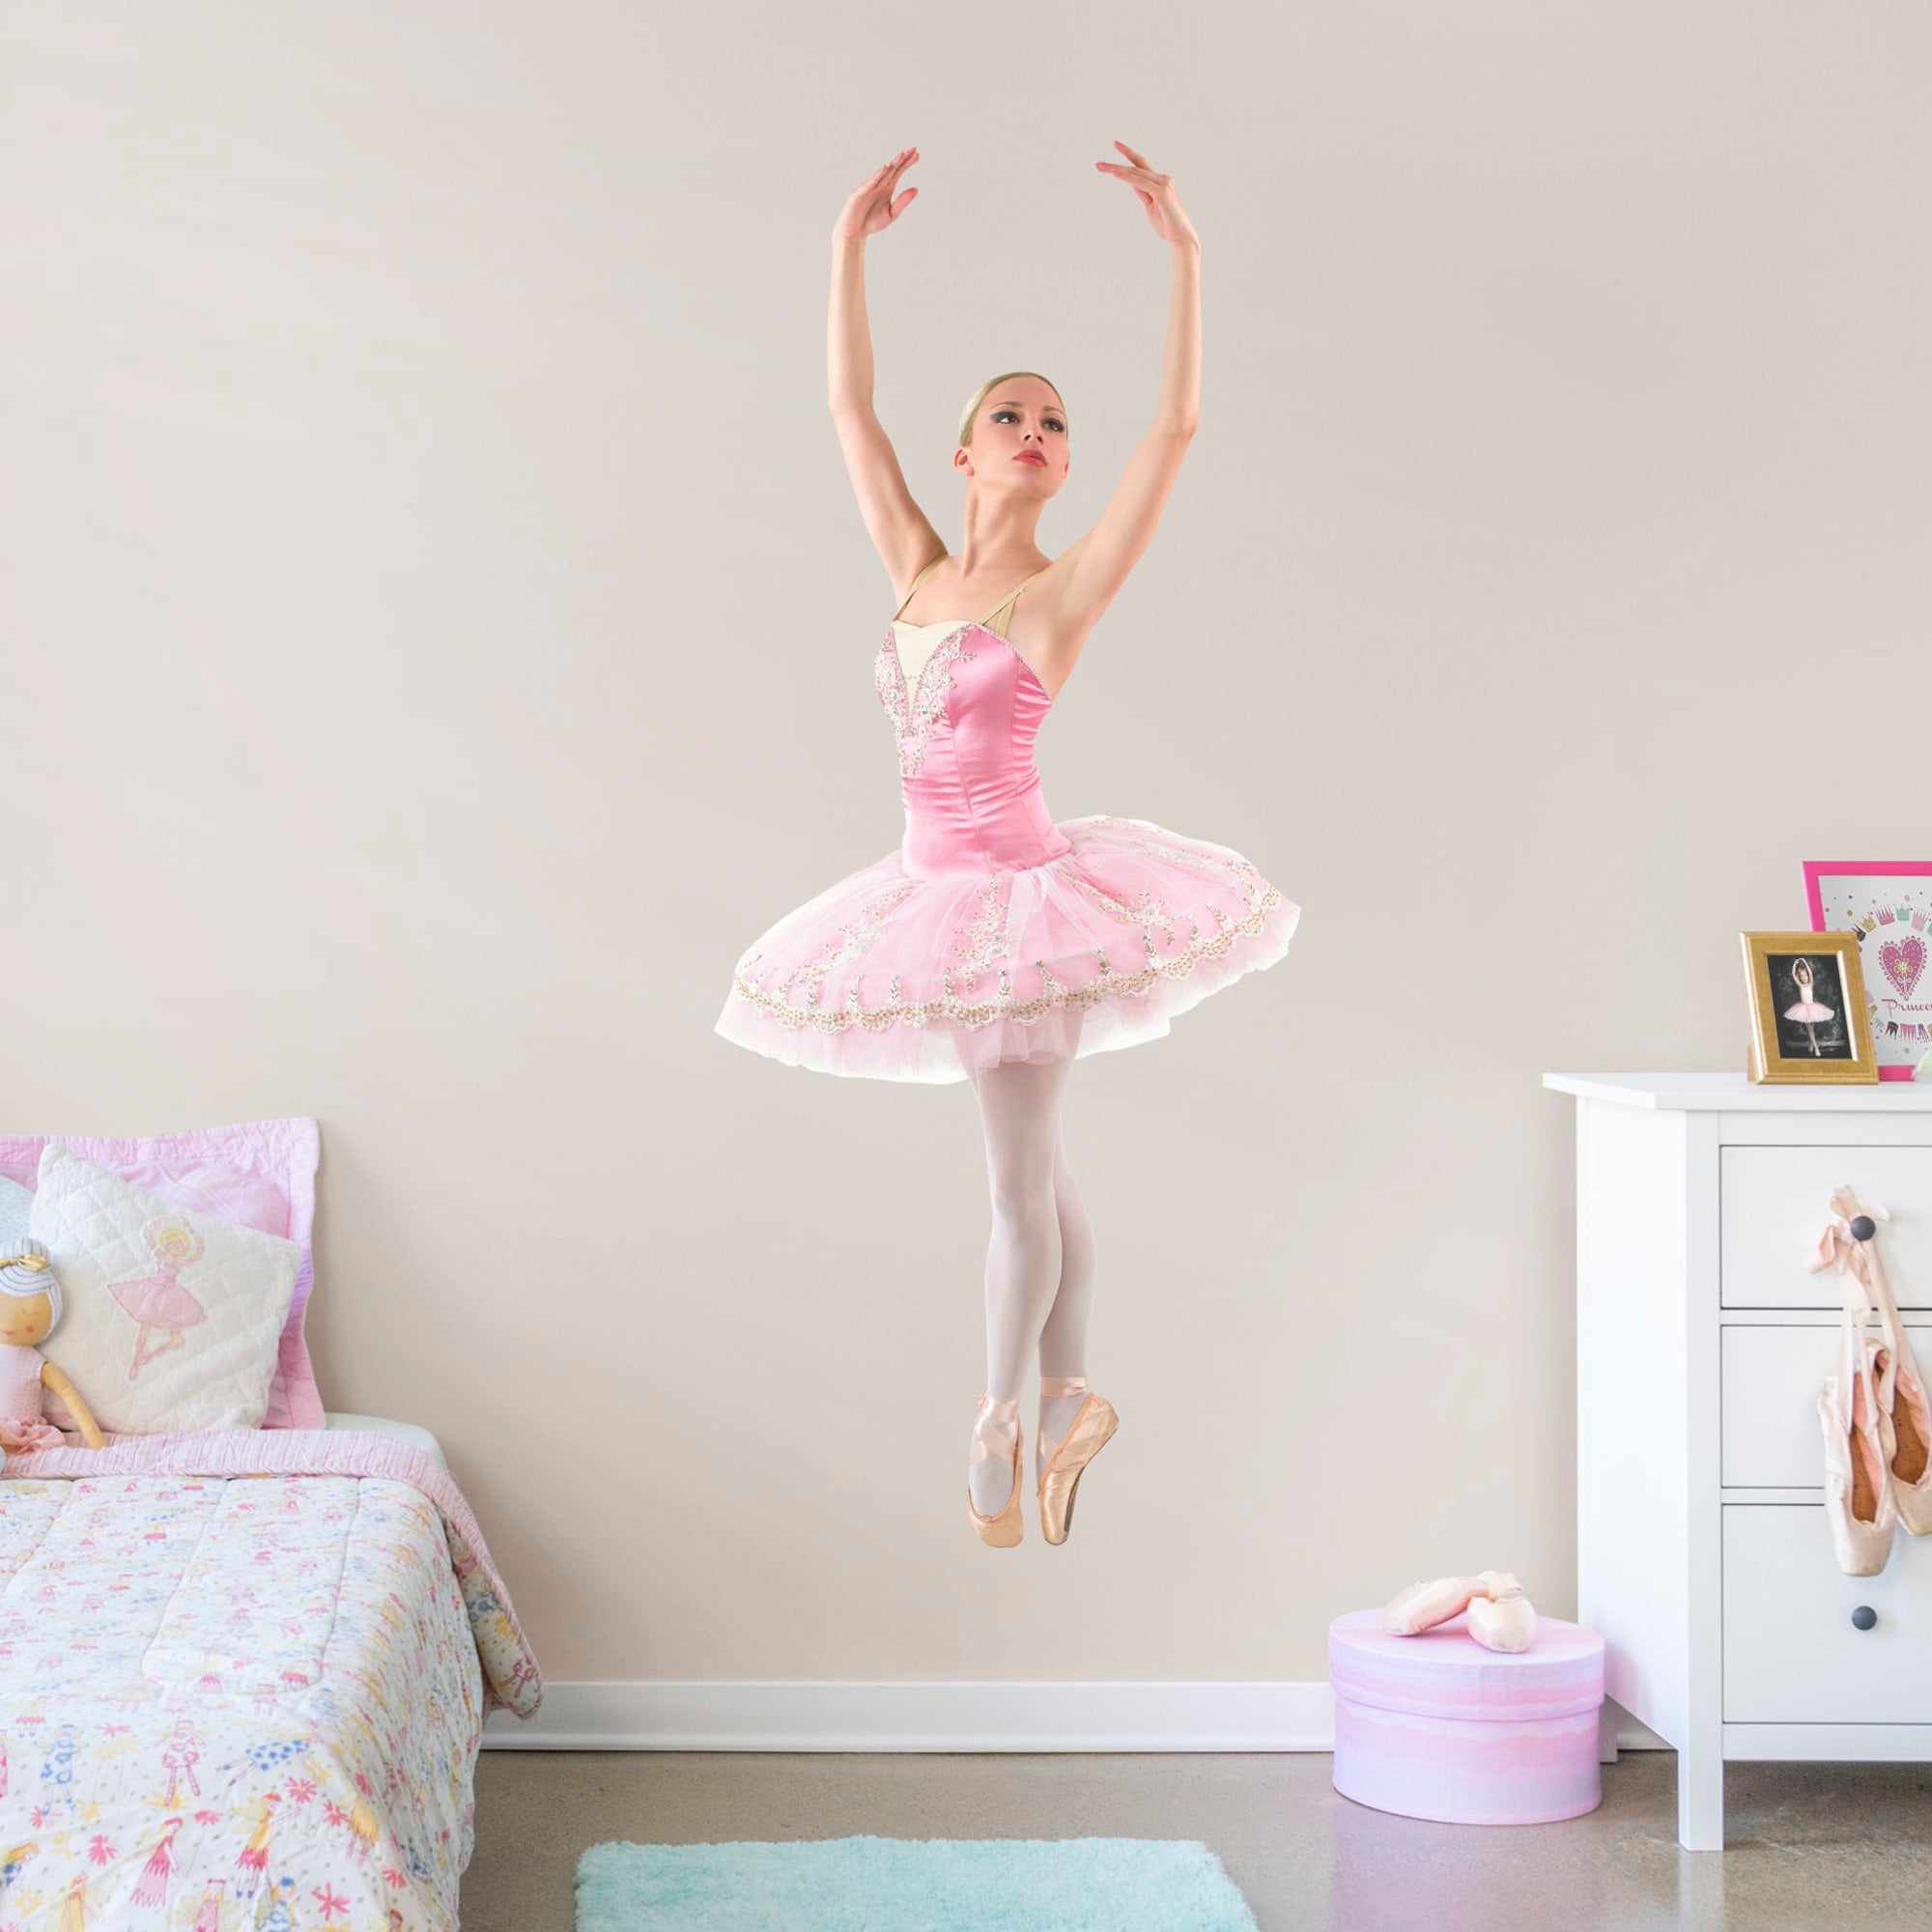 Ballet: Ballerina - Removable Vinyl Decal Life-Size Character + 2 Decals (33"W x 78"H) by Fathead